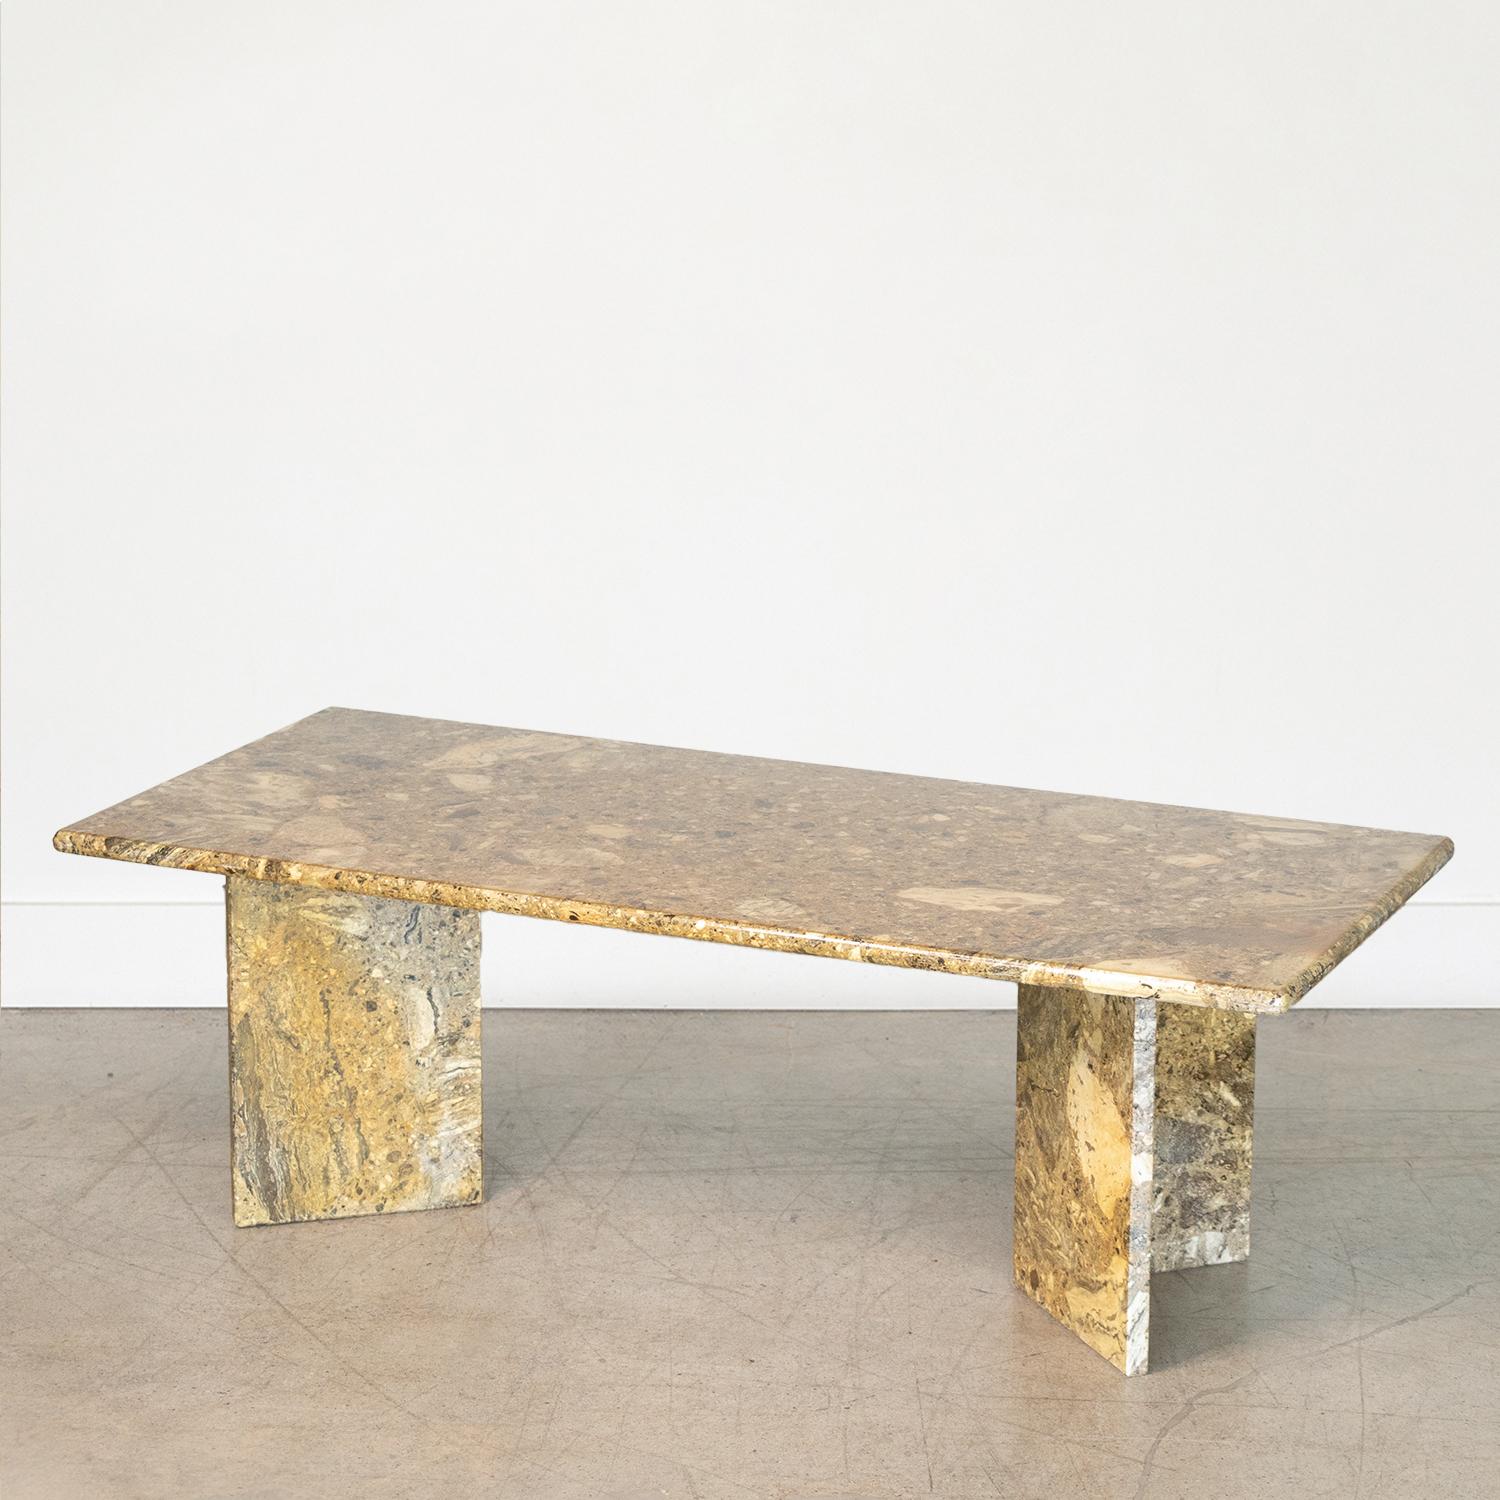 Incredible vintage marble coffee table from Italy, 1960s. Gorgeous marble with deep brown and green coloring. Rectangular top rests on two angular legs. Beautiful and functional statement piece. 

.